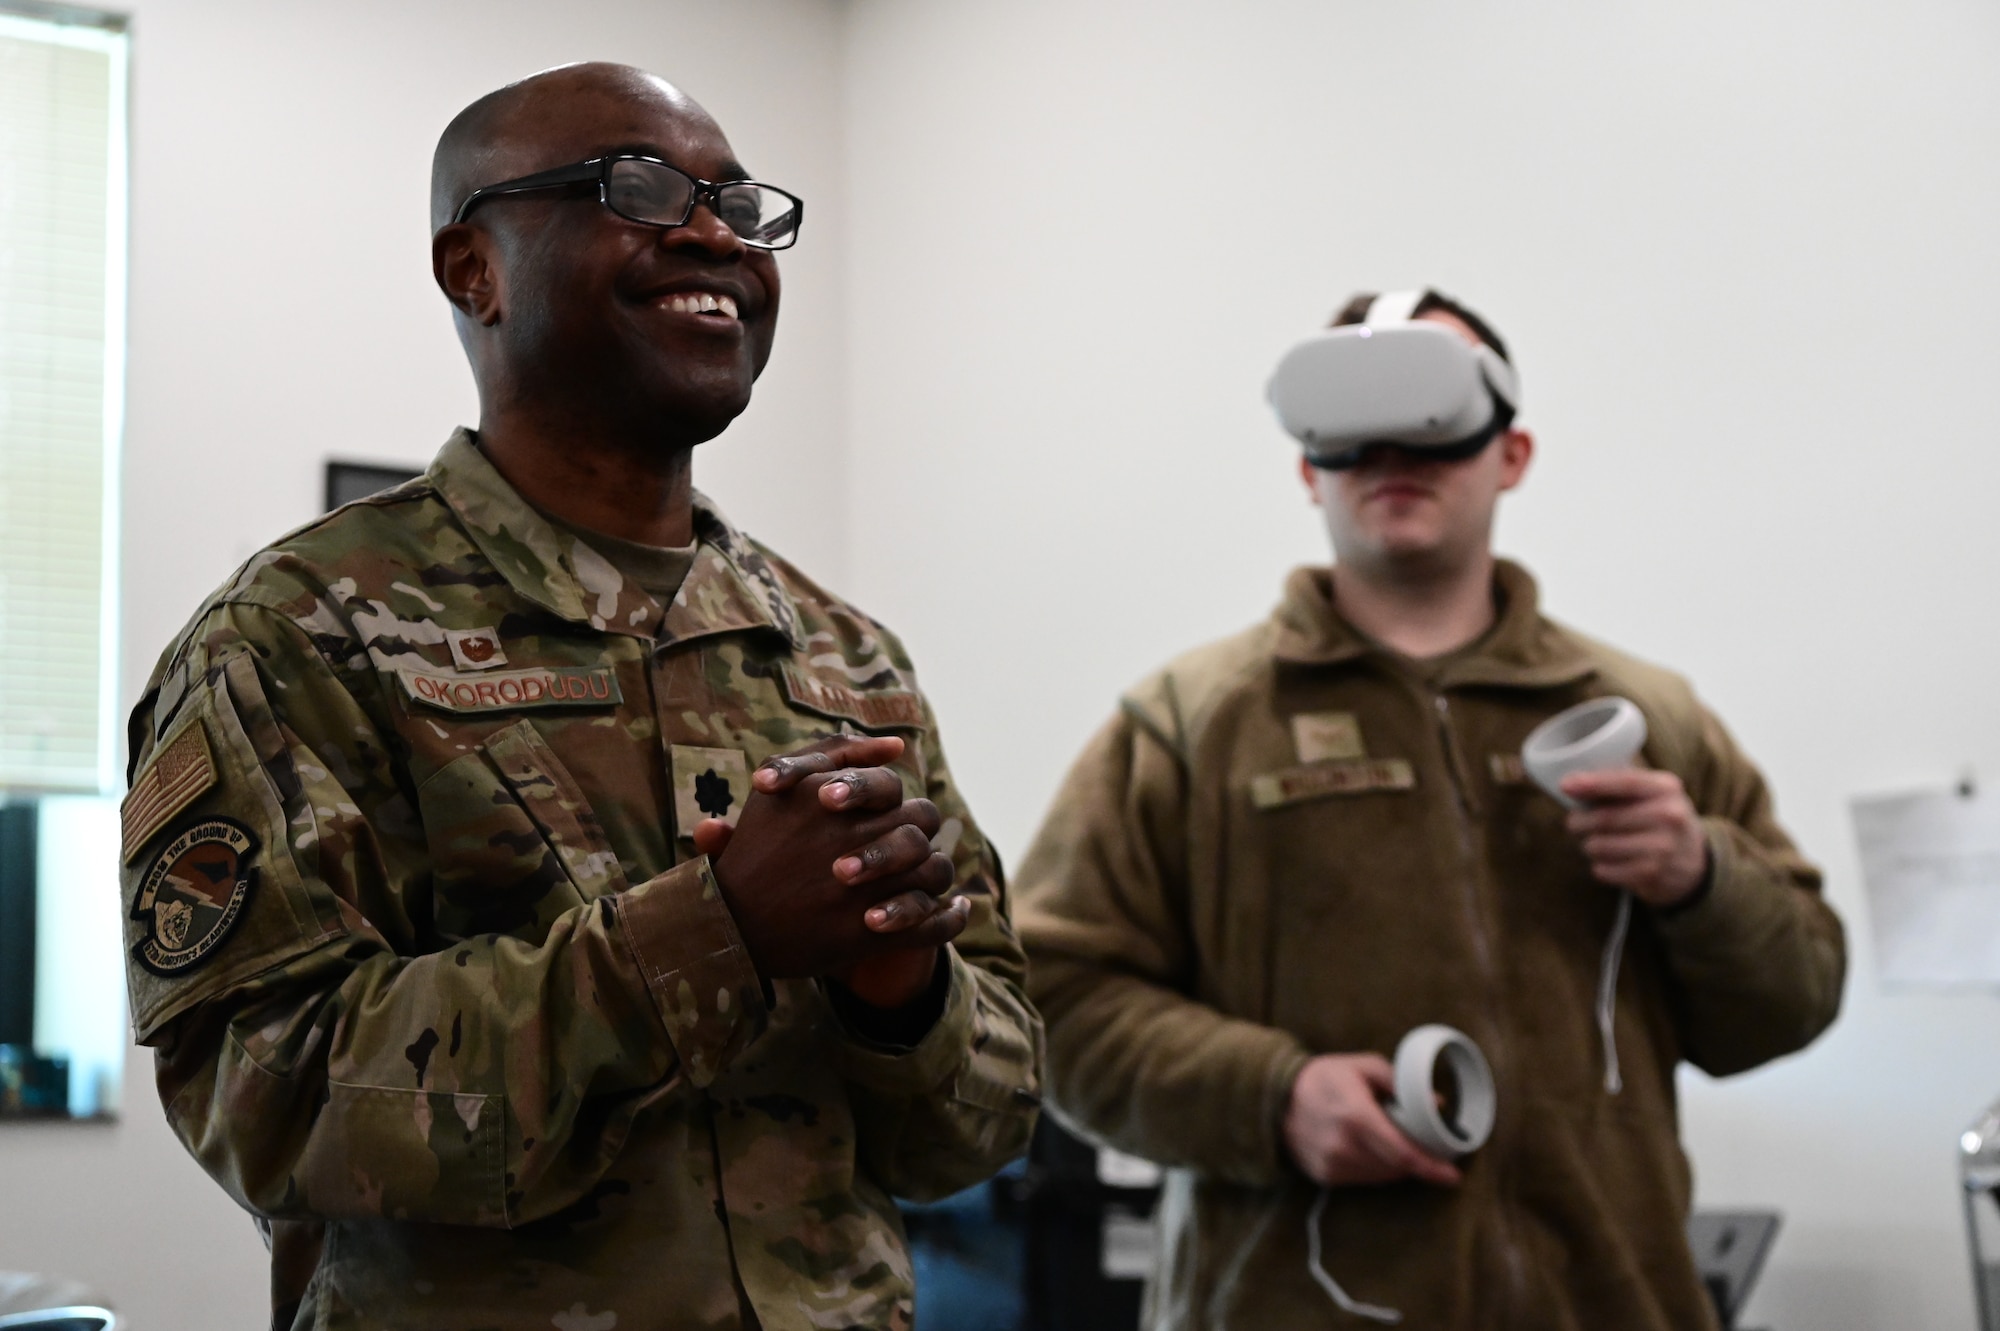 U.S. Air Force Lt. Col. George Okorowdudu, the 673d Logistics Readiness Squadron commander, visits the 673d LRS to talk to the developers of a new Virtual Reality Training tool at Joint Base Elmendorf-Richardson, Alaska, Jan. 31 2023.